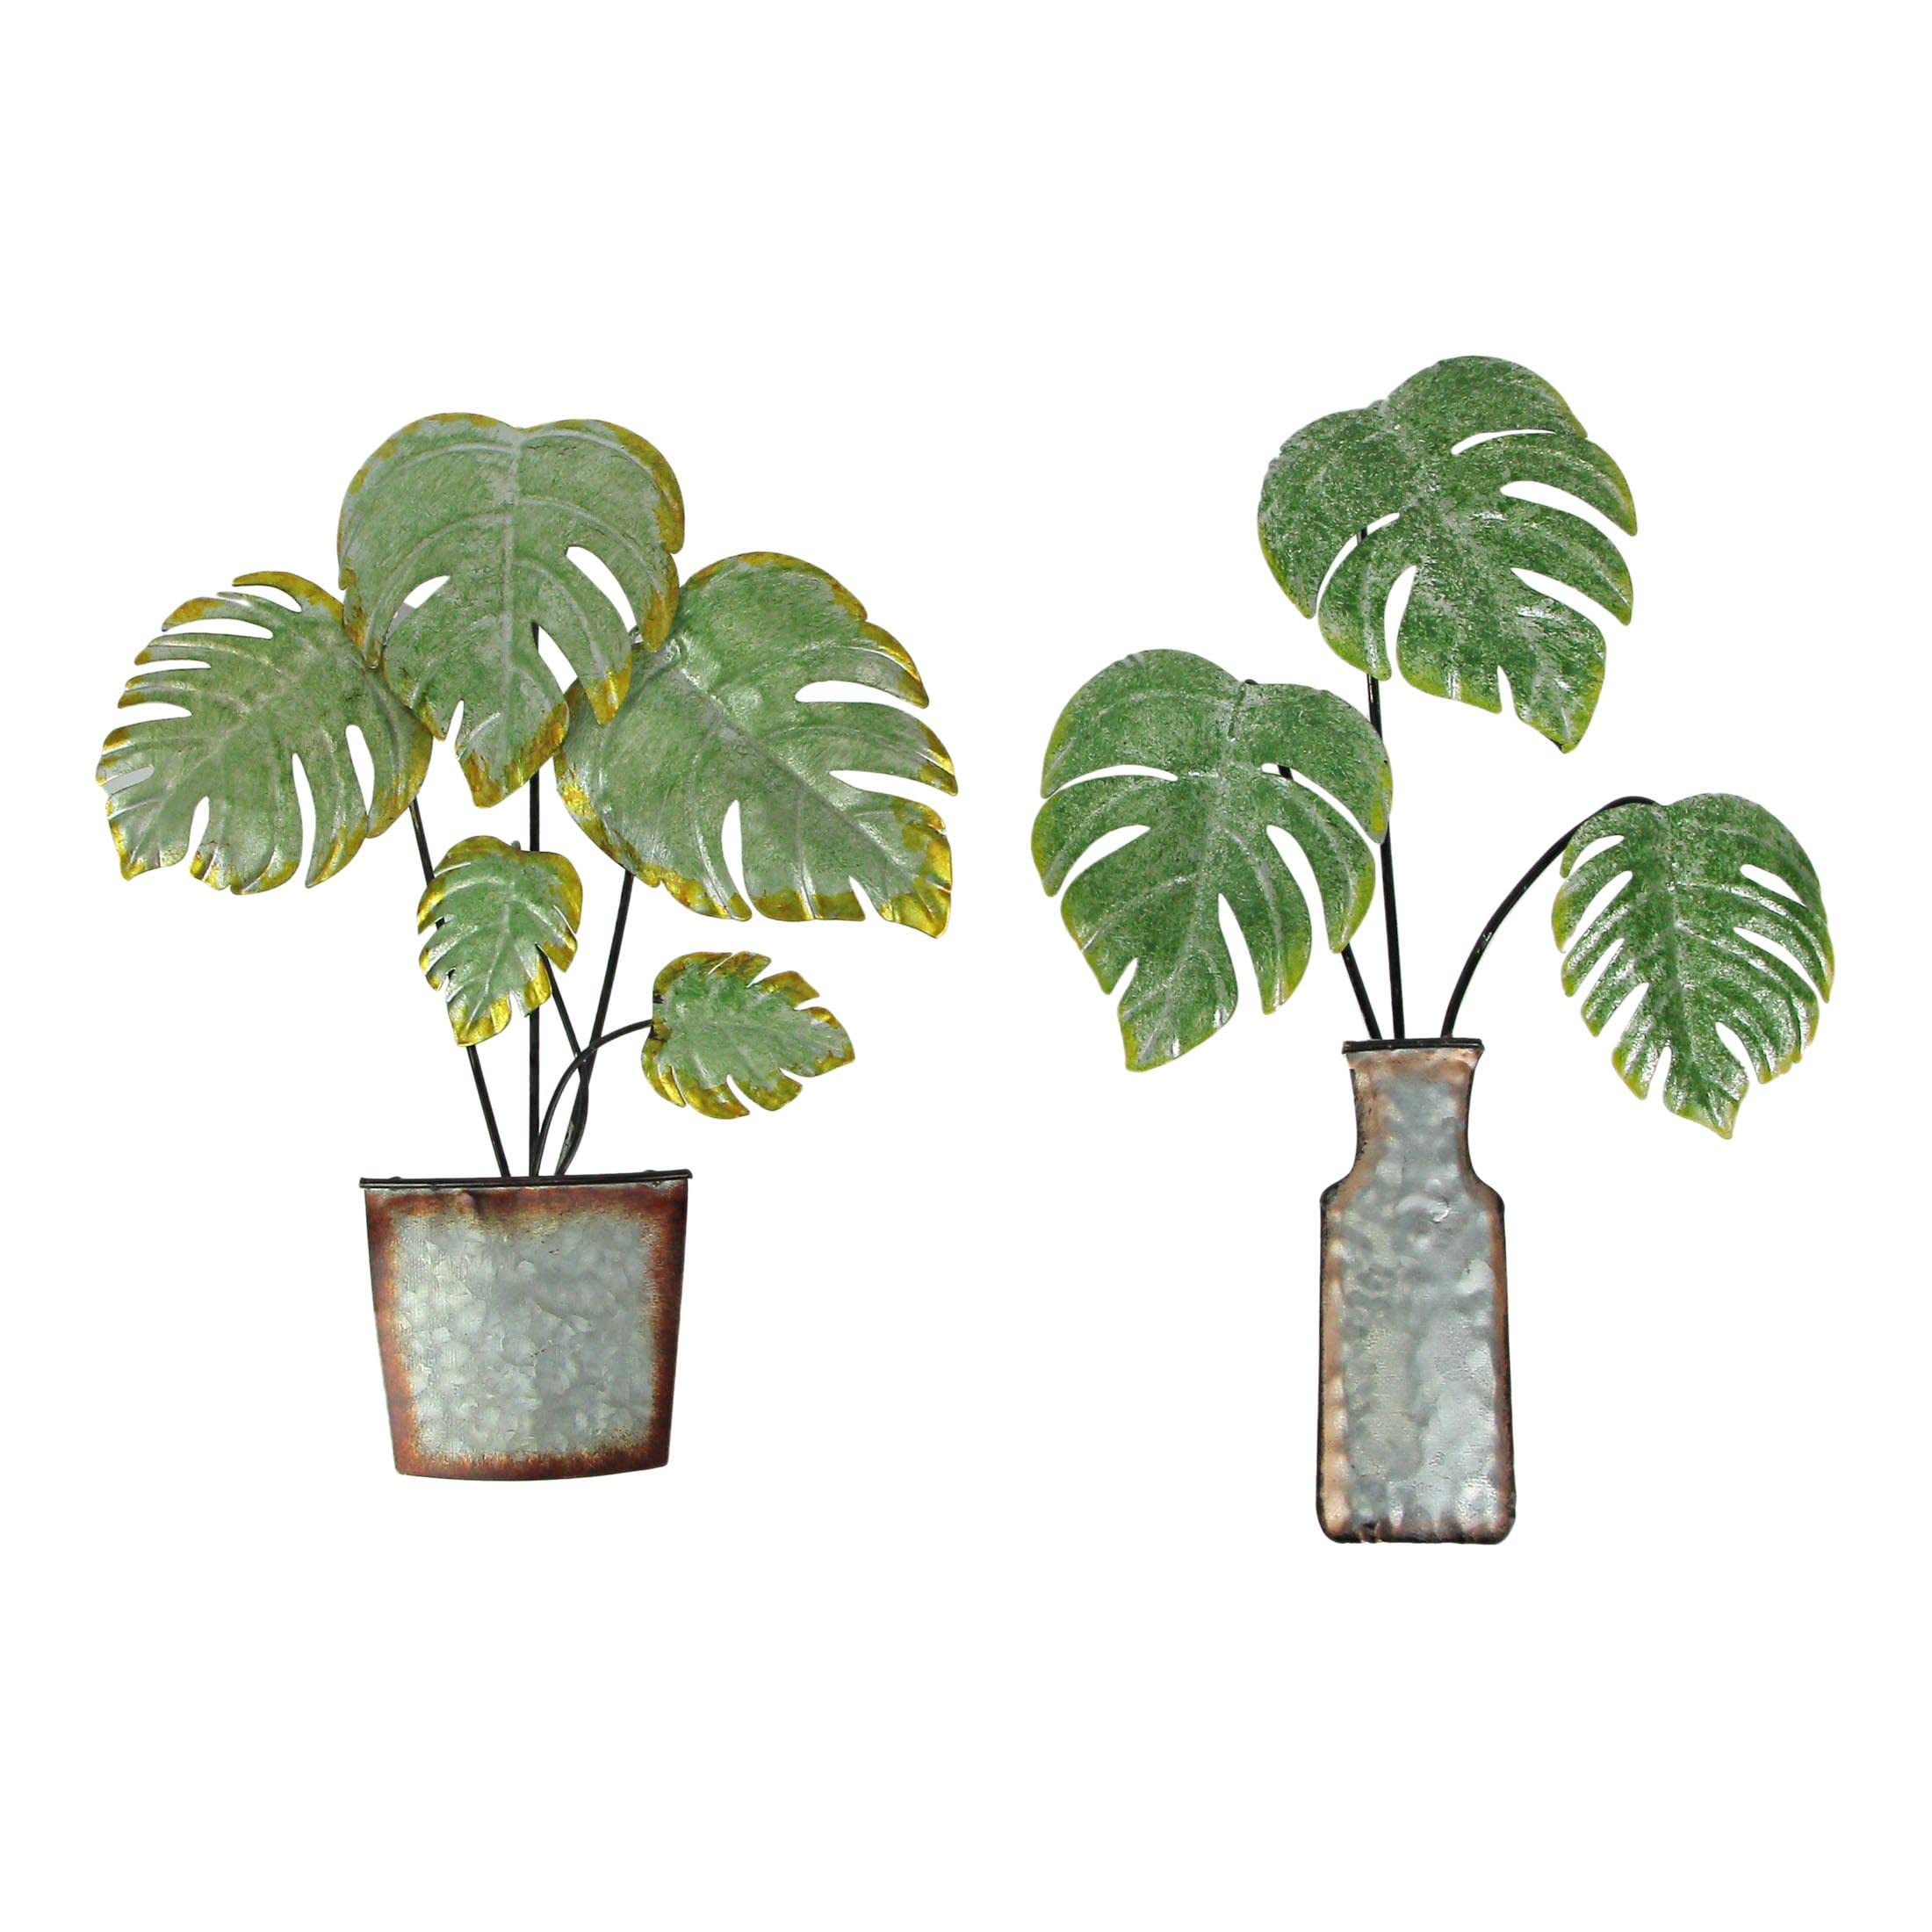 A decorative plant in a vase and a potted plant on a white background - Monstera